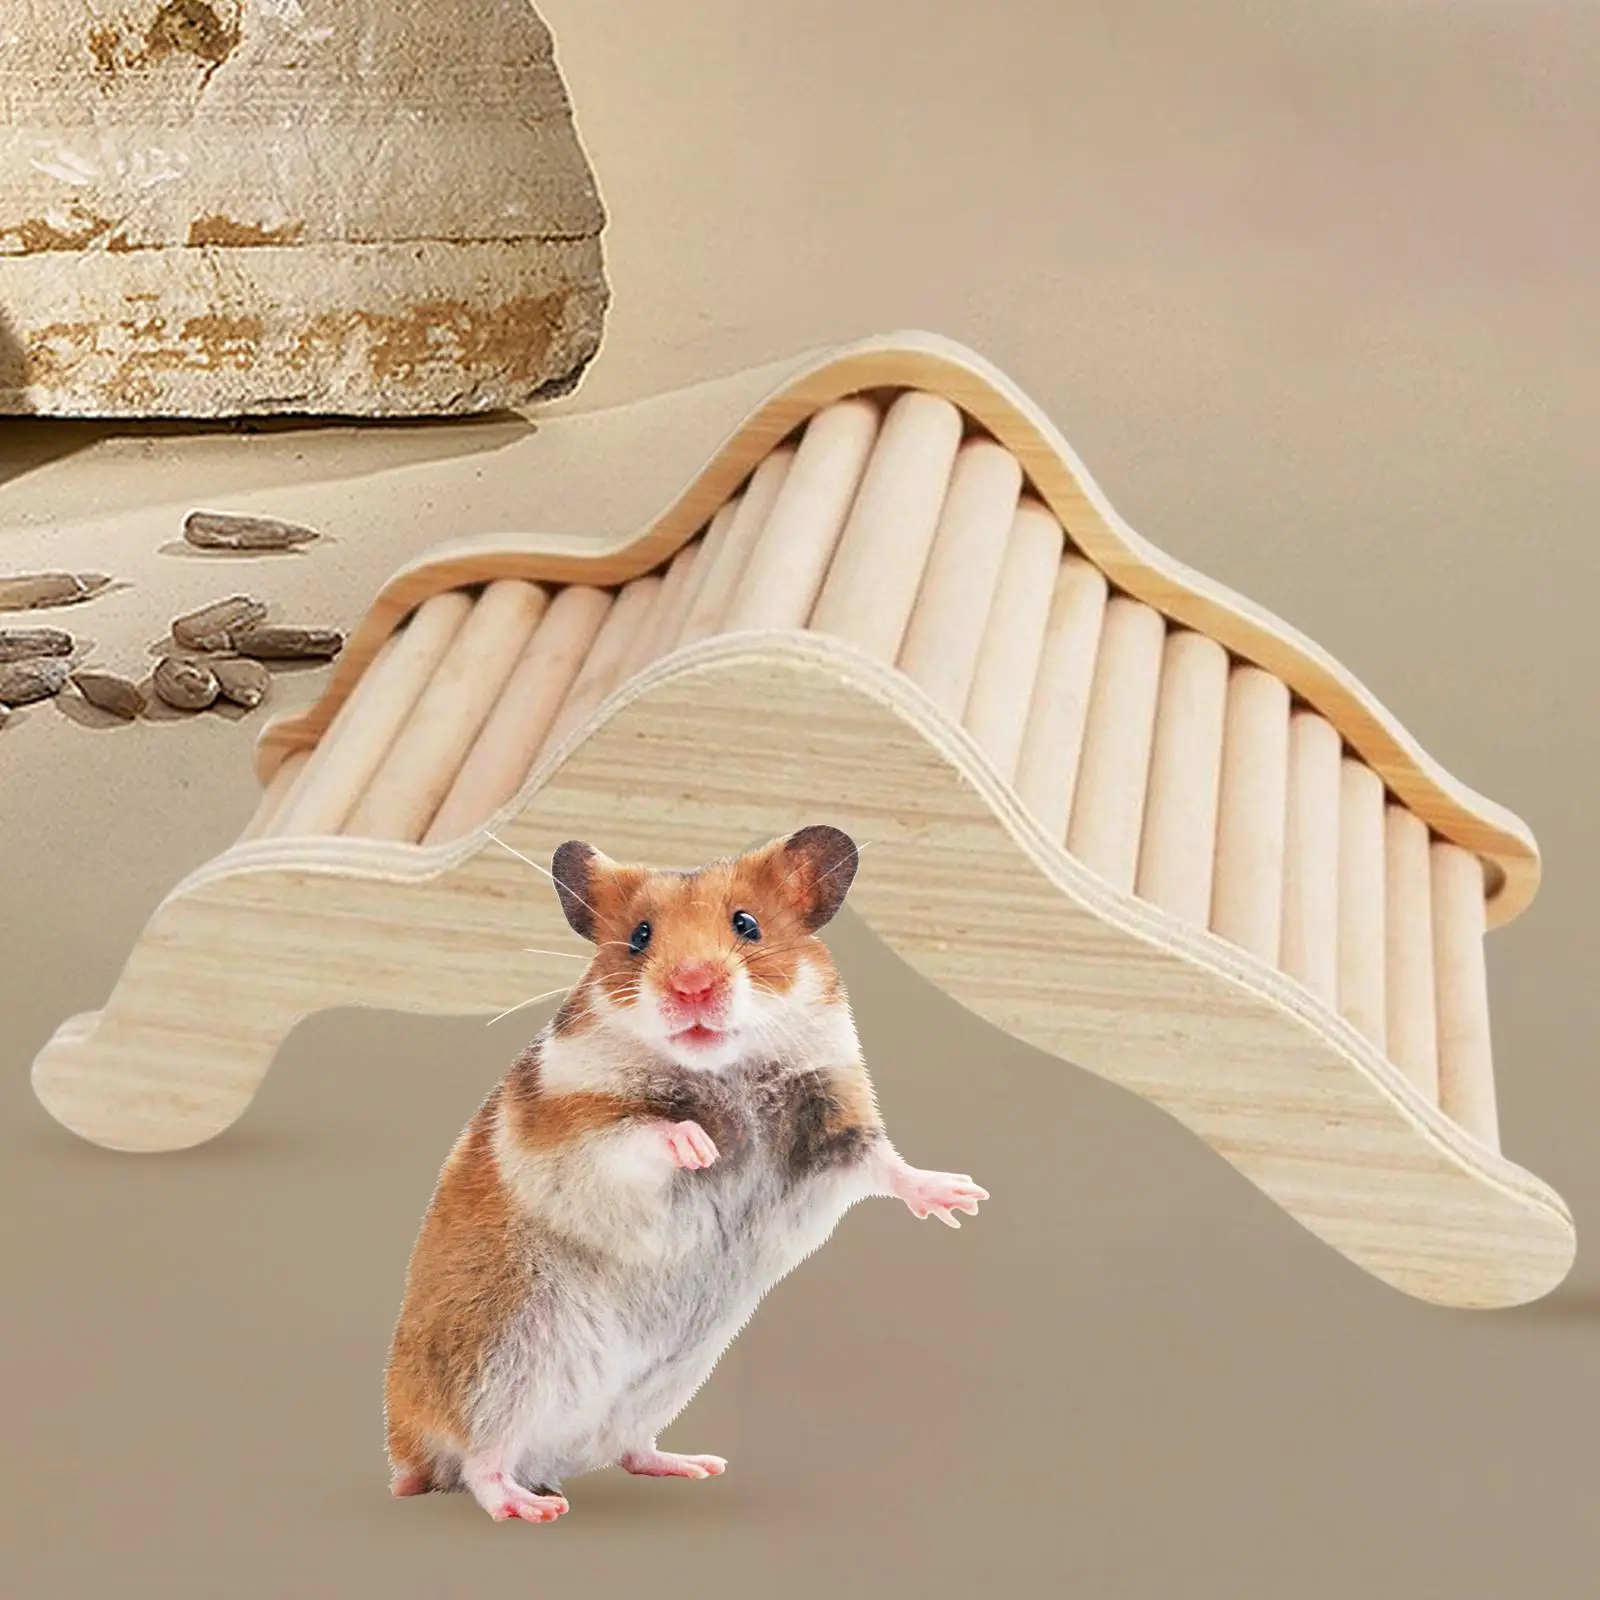 Hamster bridge Cage Accessories Exercise Toy Decorative Hamster Ladder Toys for Squirrel Mouse Budgie Bird Training